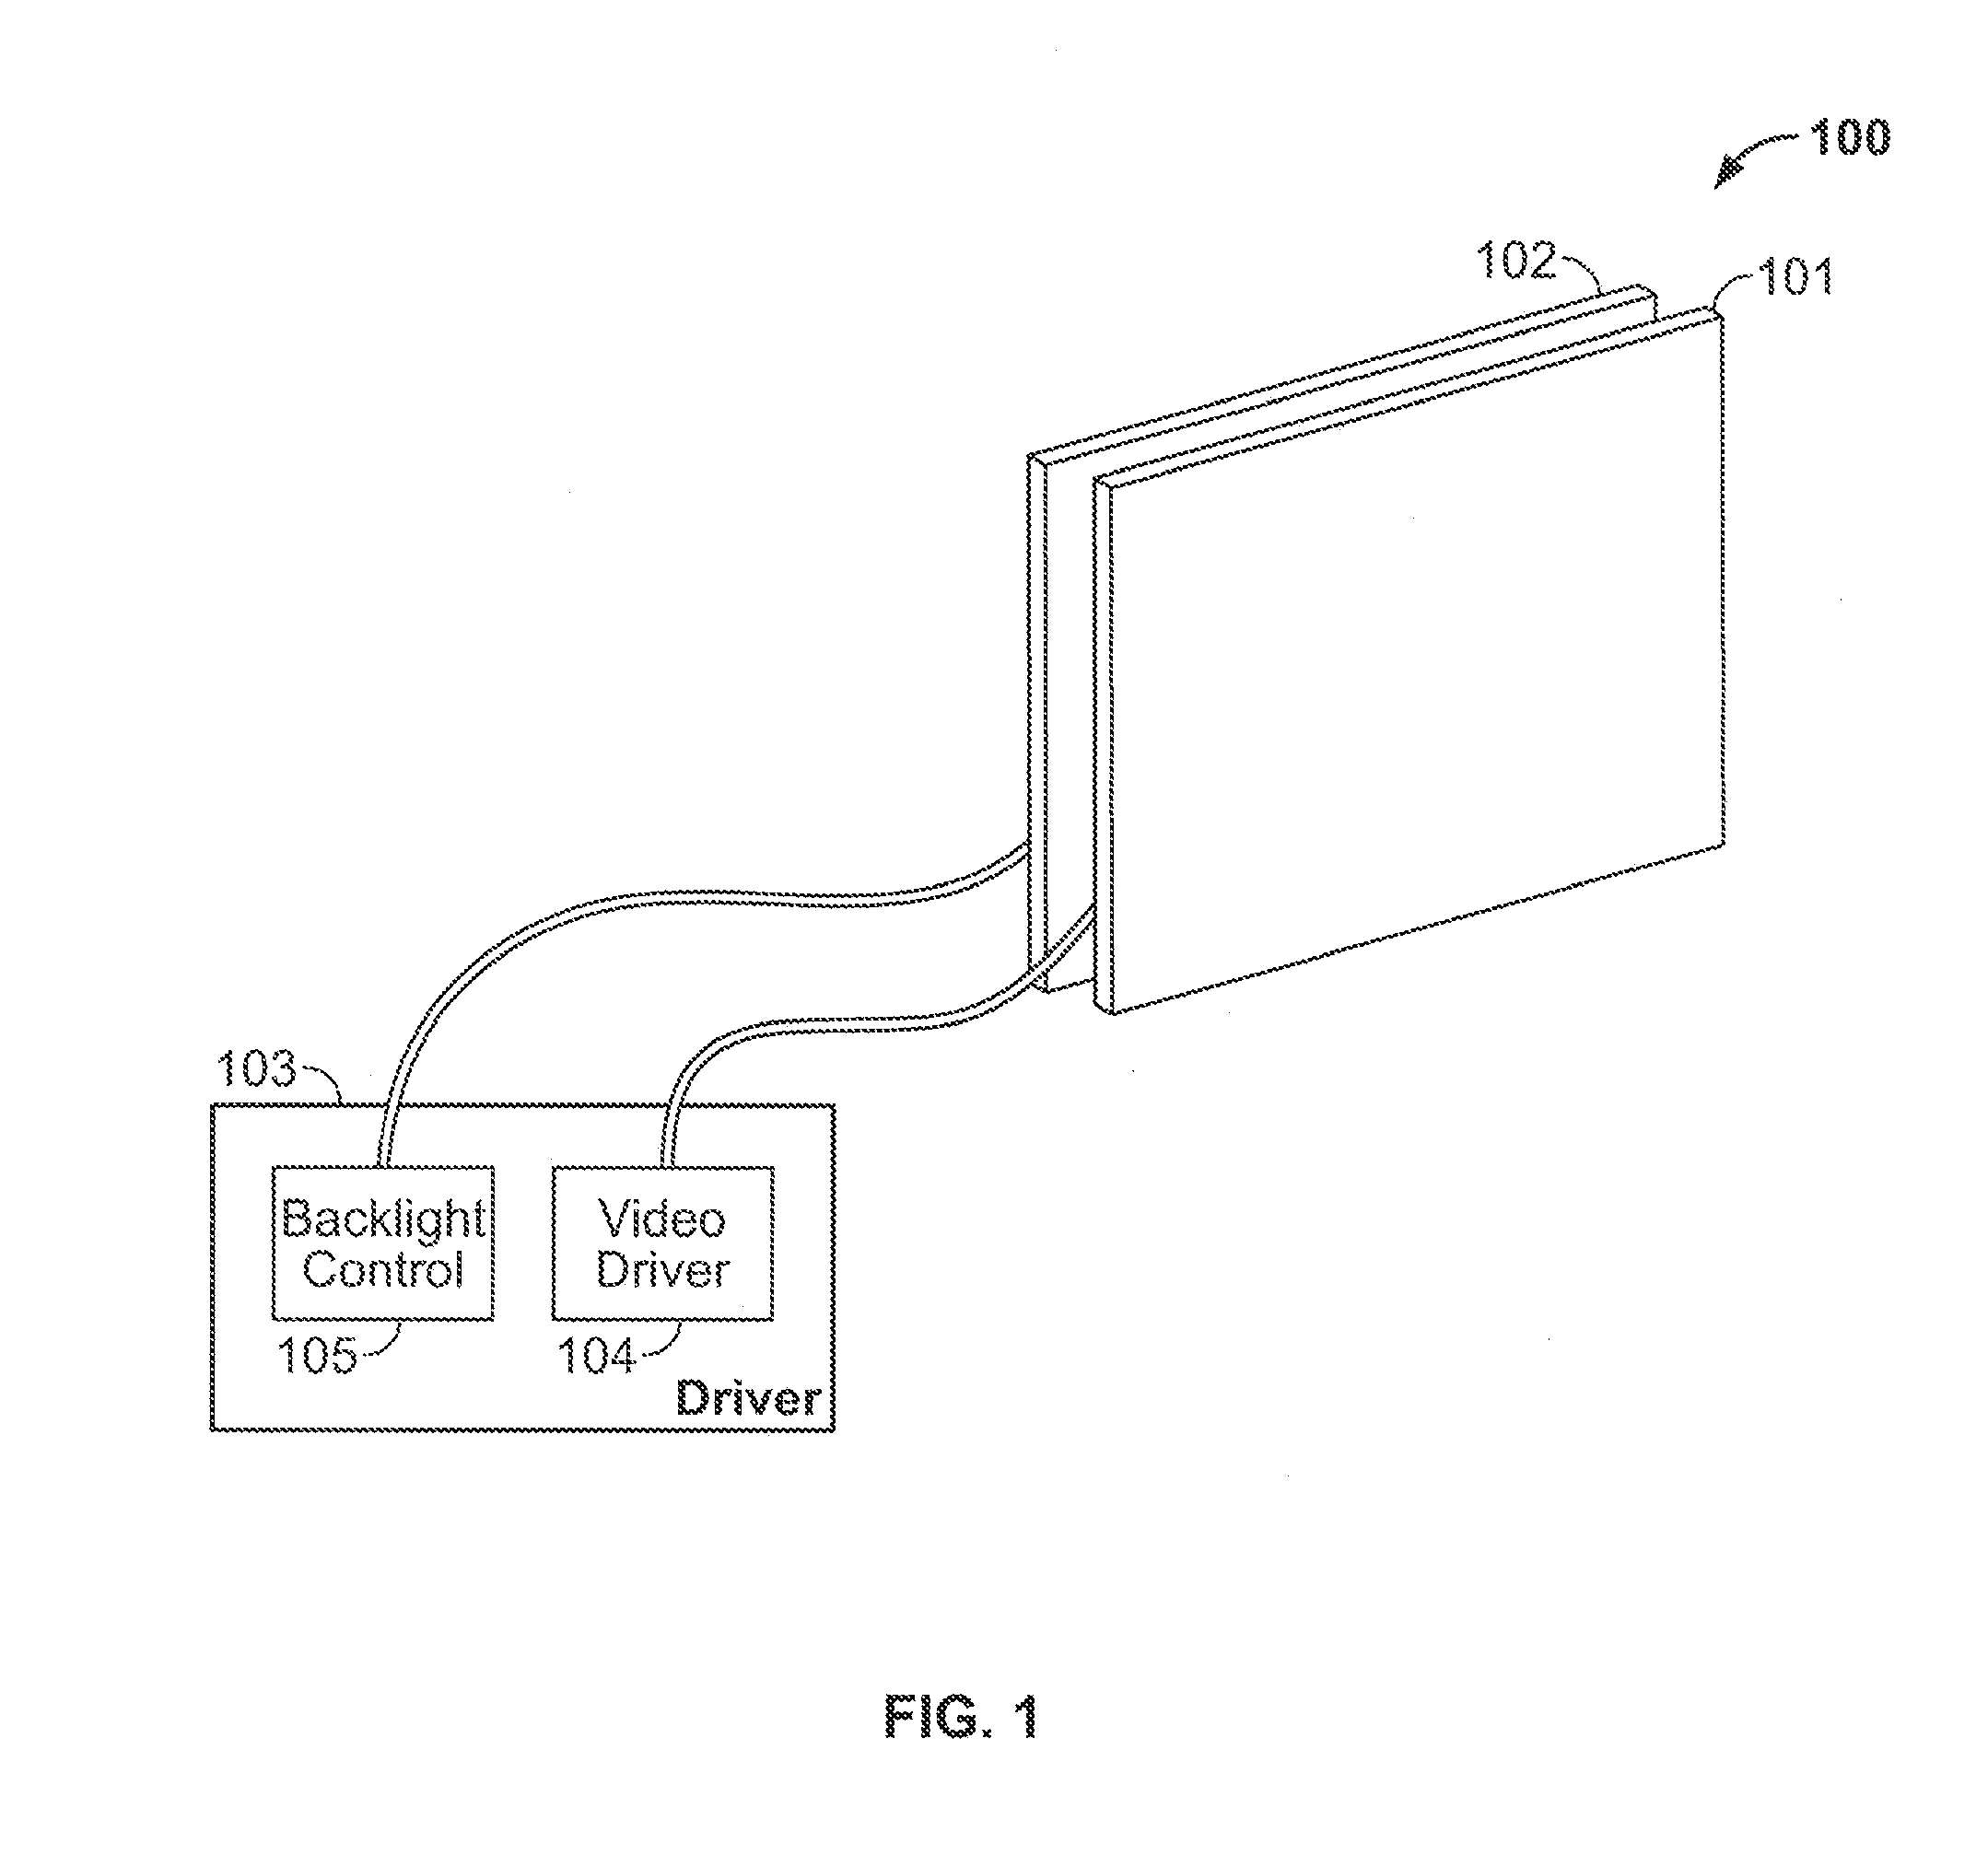 Pulse-width modulation control for backlighting of a video display